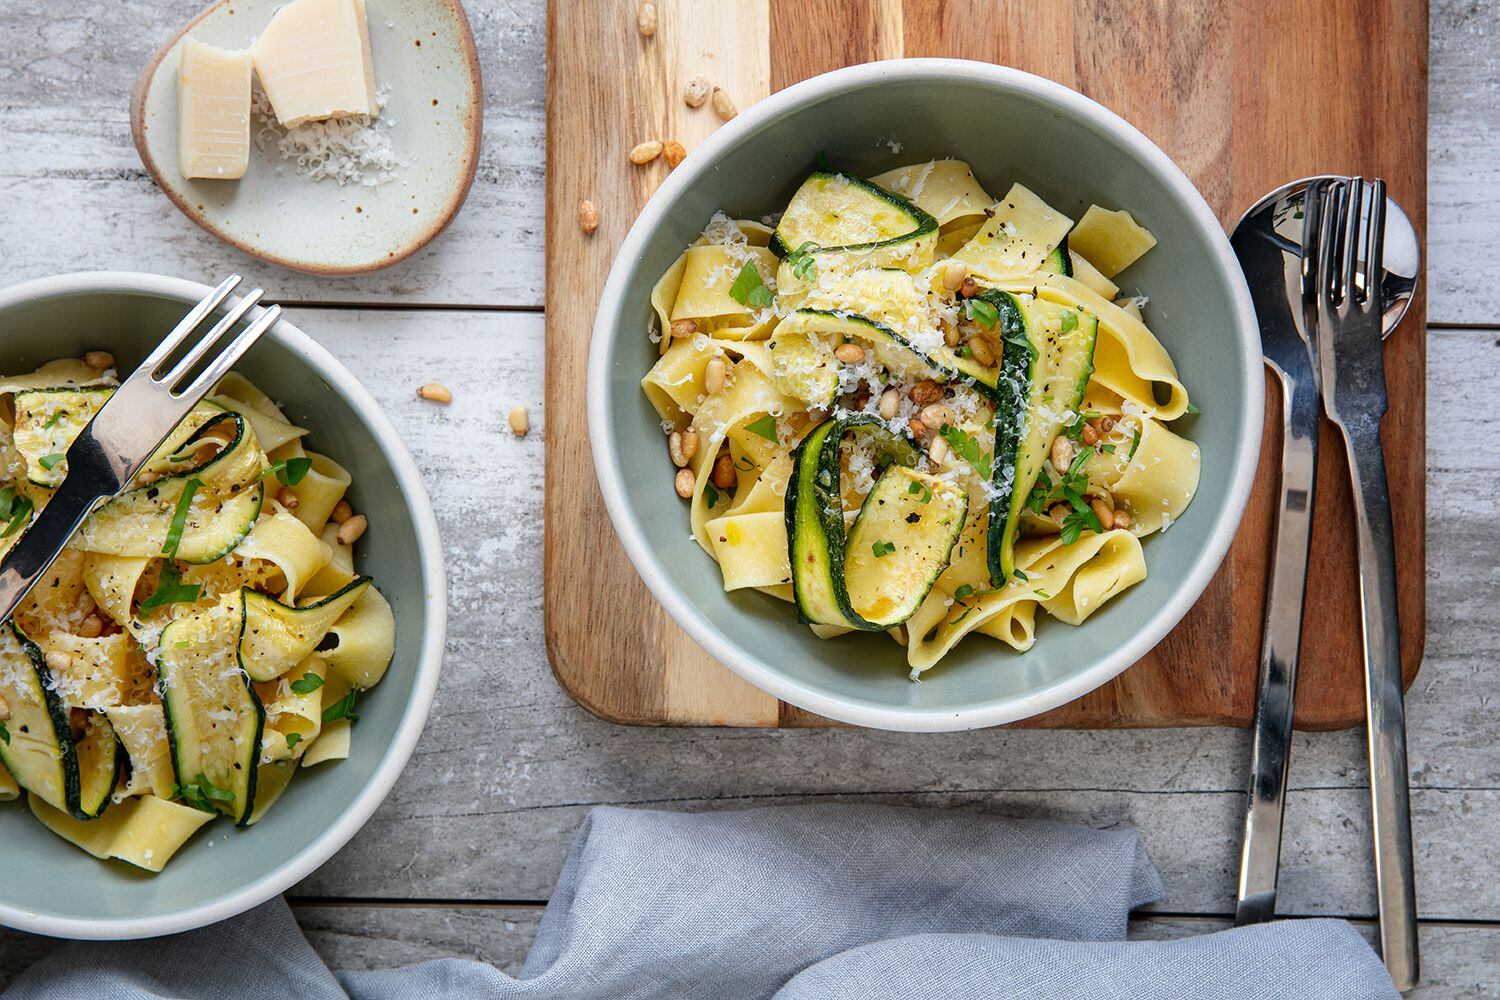 Courgettes, Truffle Oil & Parmesan Make For A Rich, No-Fuss Pasta - NZ  Herald